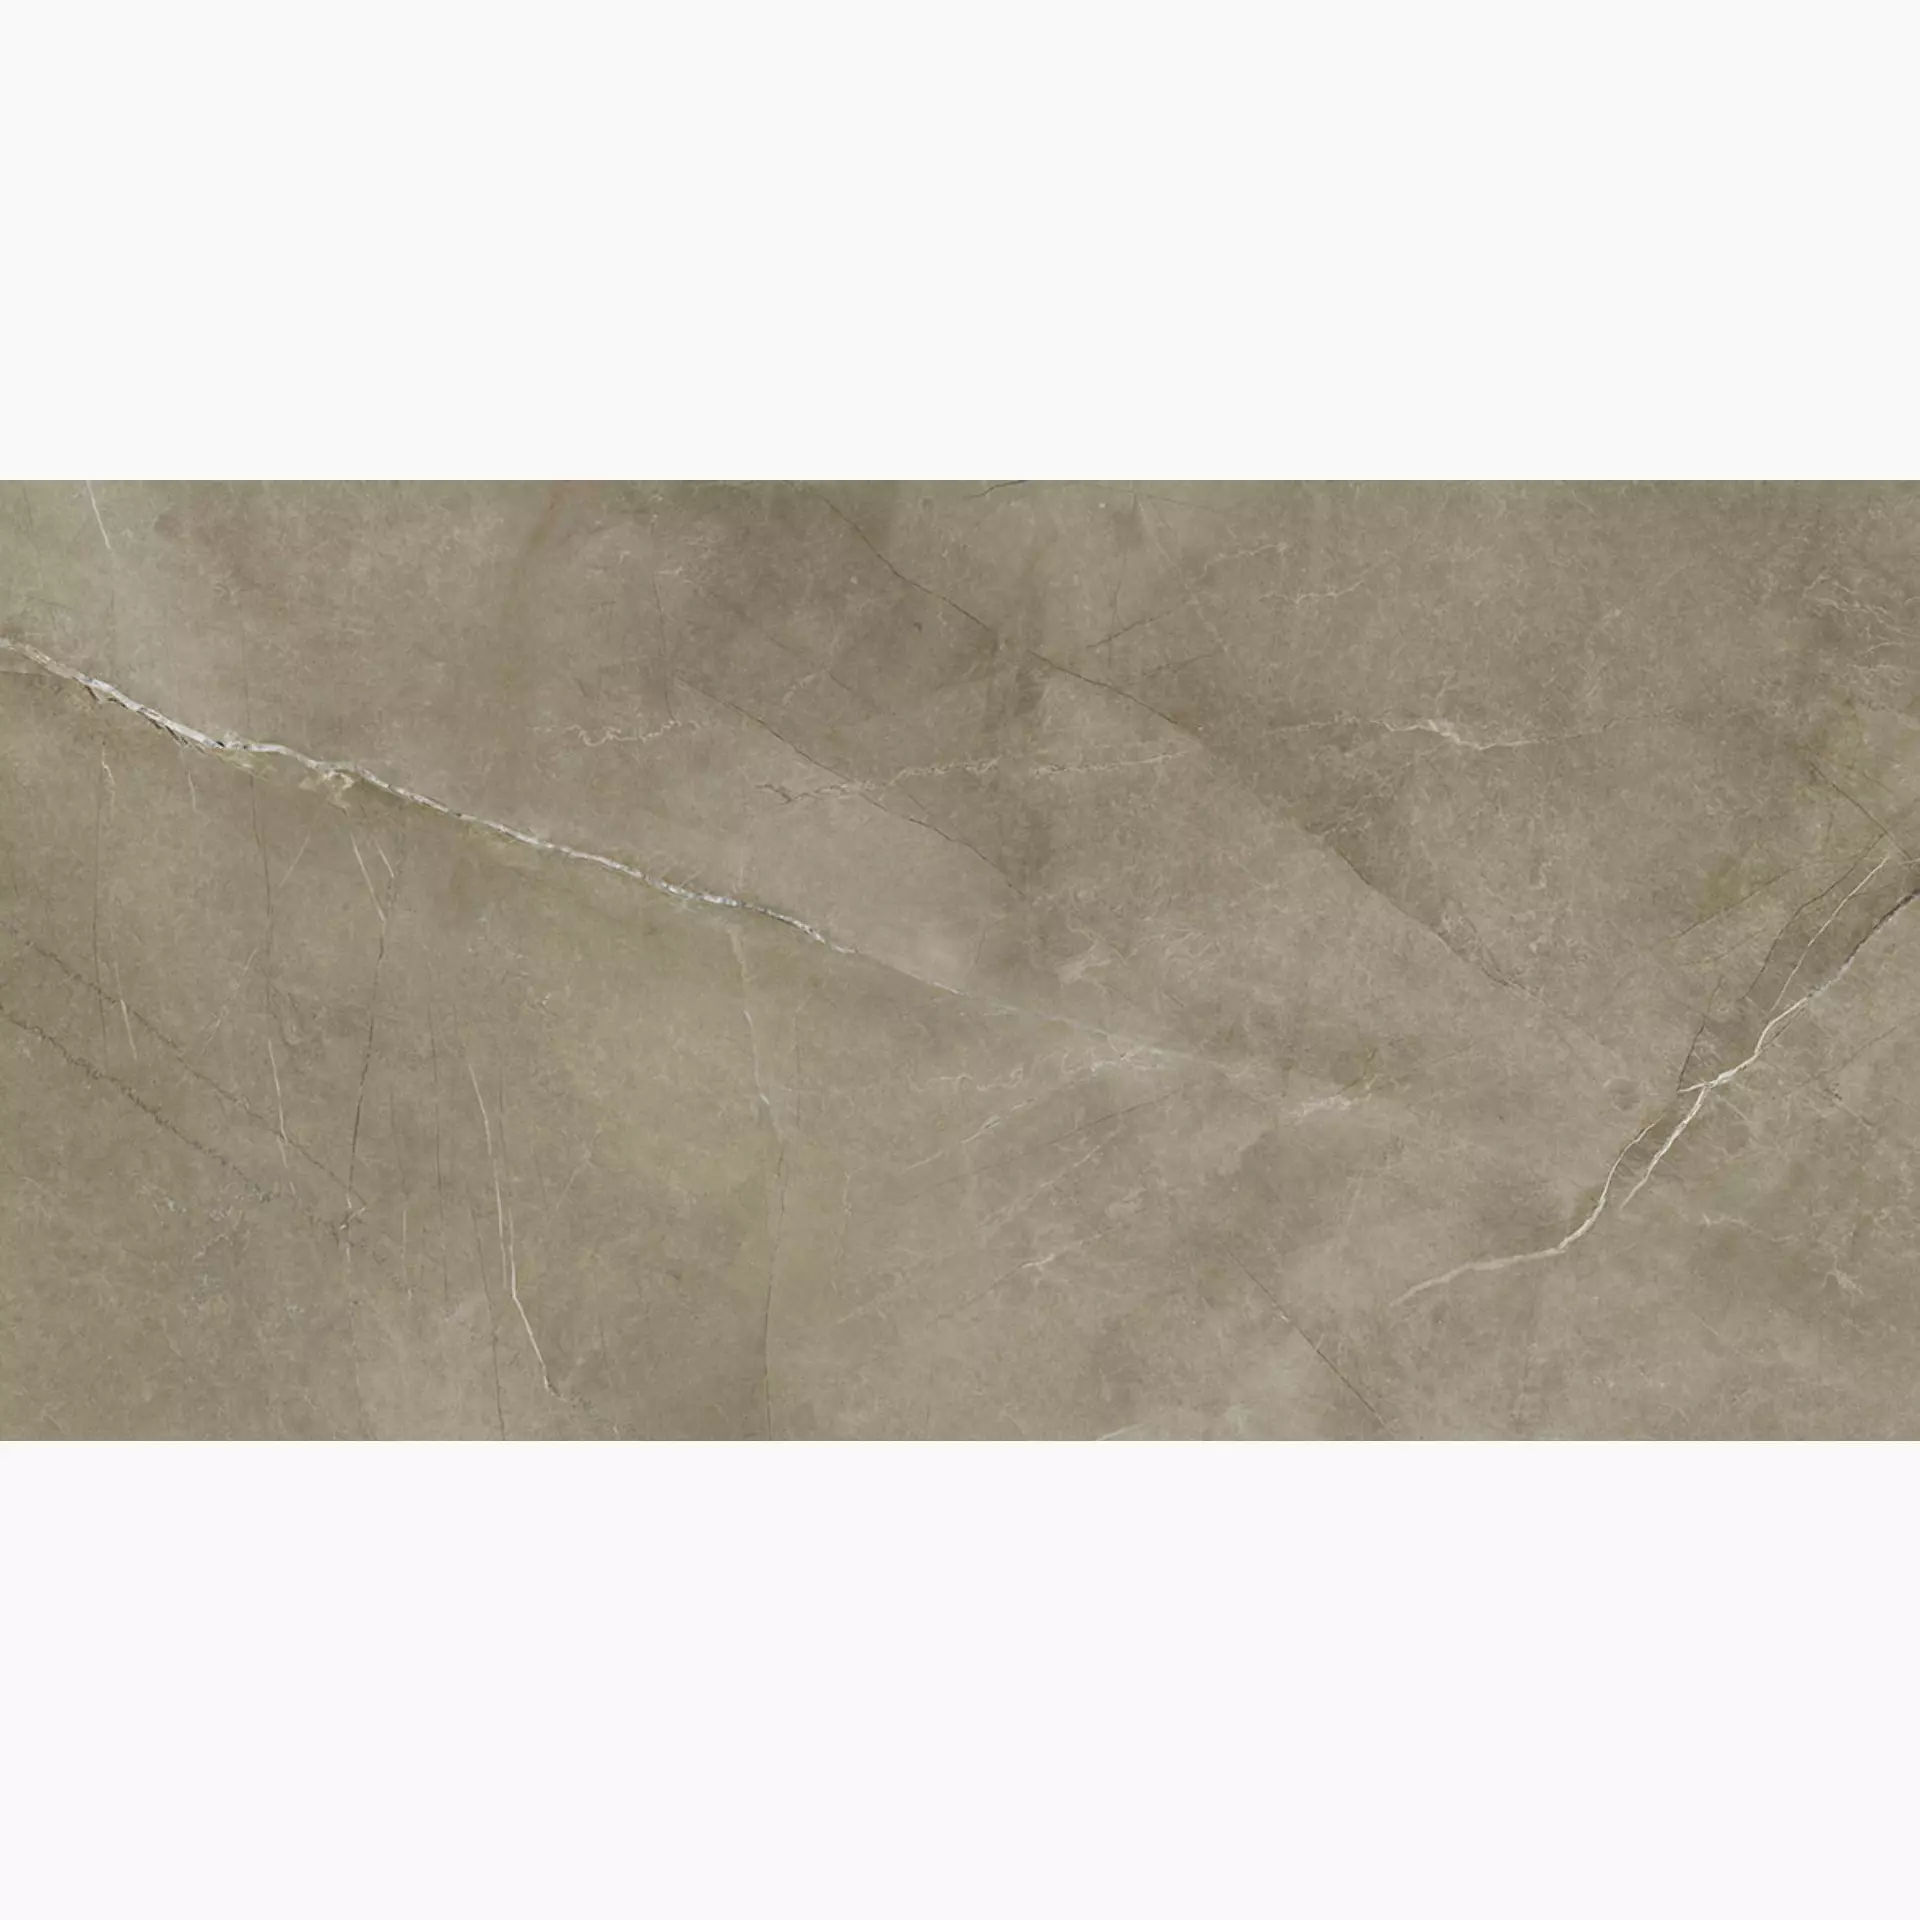 MGM Lux Taupe Levigato LUXTAULEV3060 30x60cm rectified 10mm